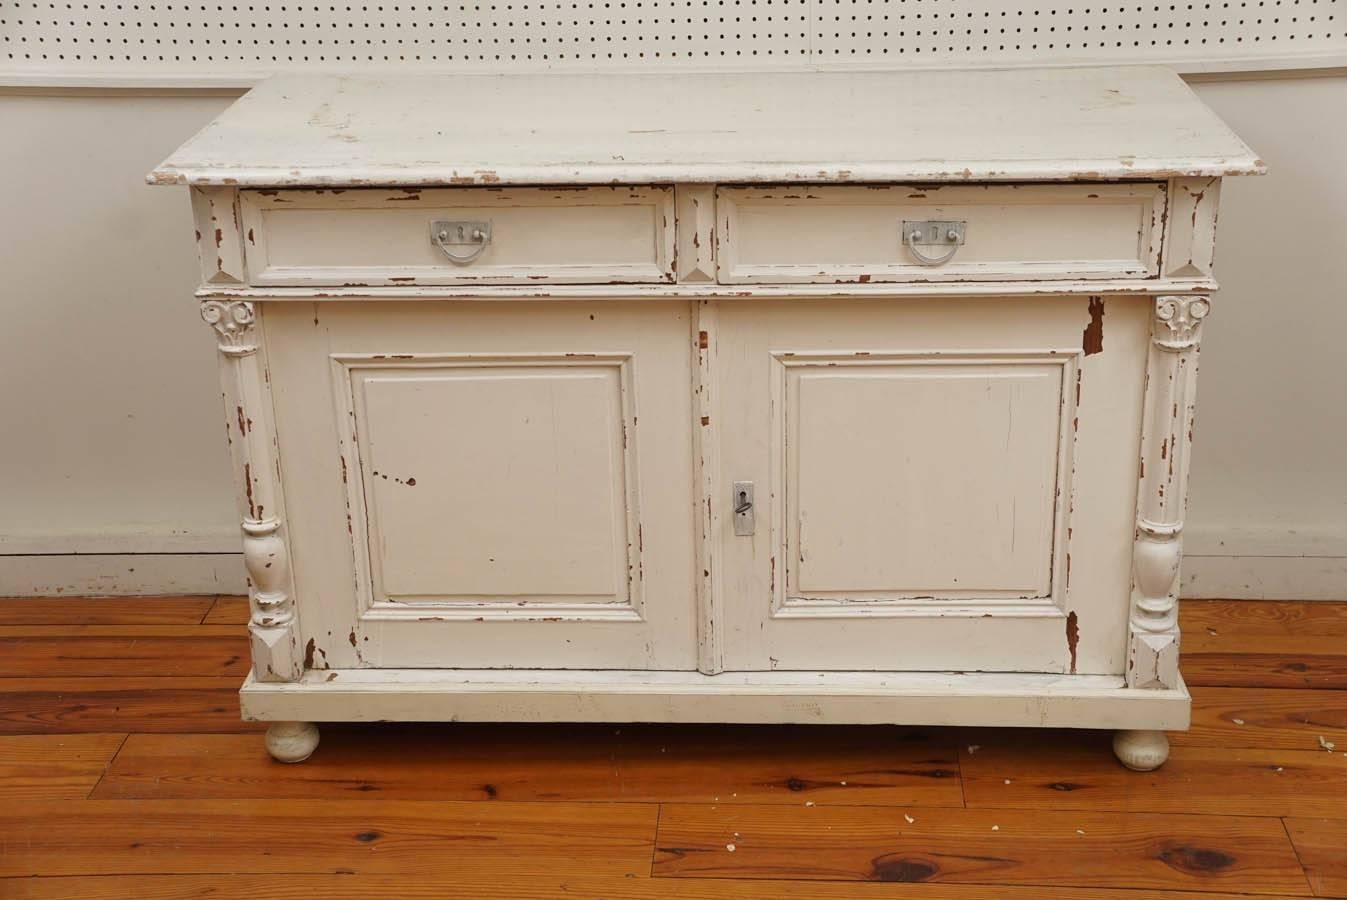 The French do wonders with their moulding and this soft, romantic buffet is no exception. With original hardware and lock this worn off-white buffet is most functional as well as a pretty look. One inside shelf with no vertical separation makes for